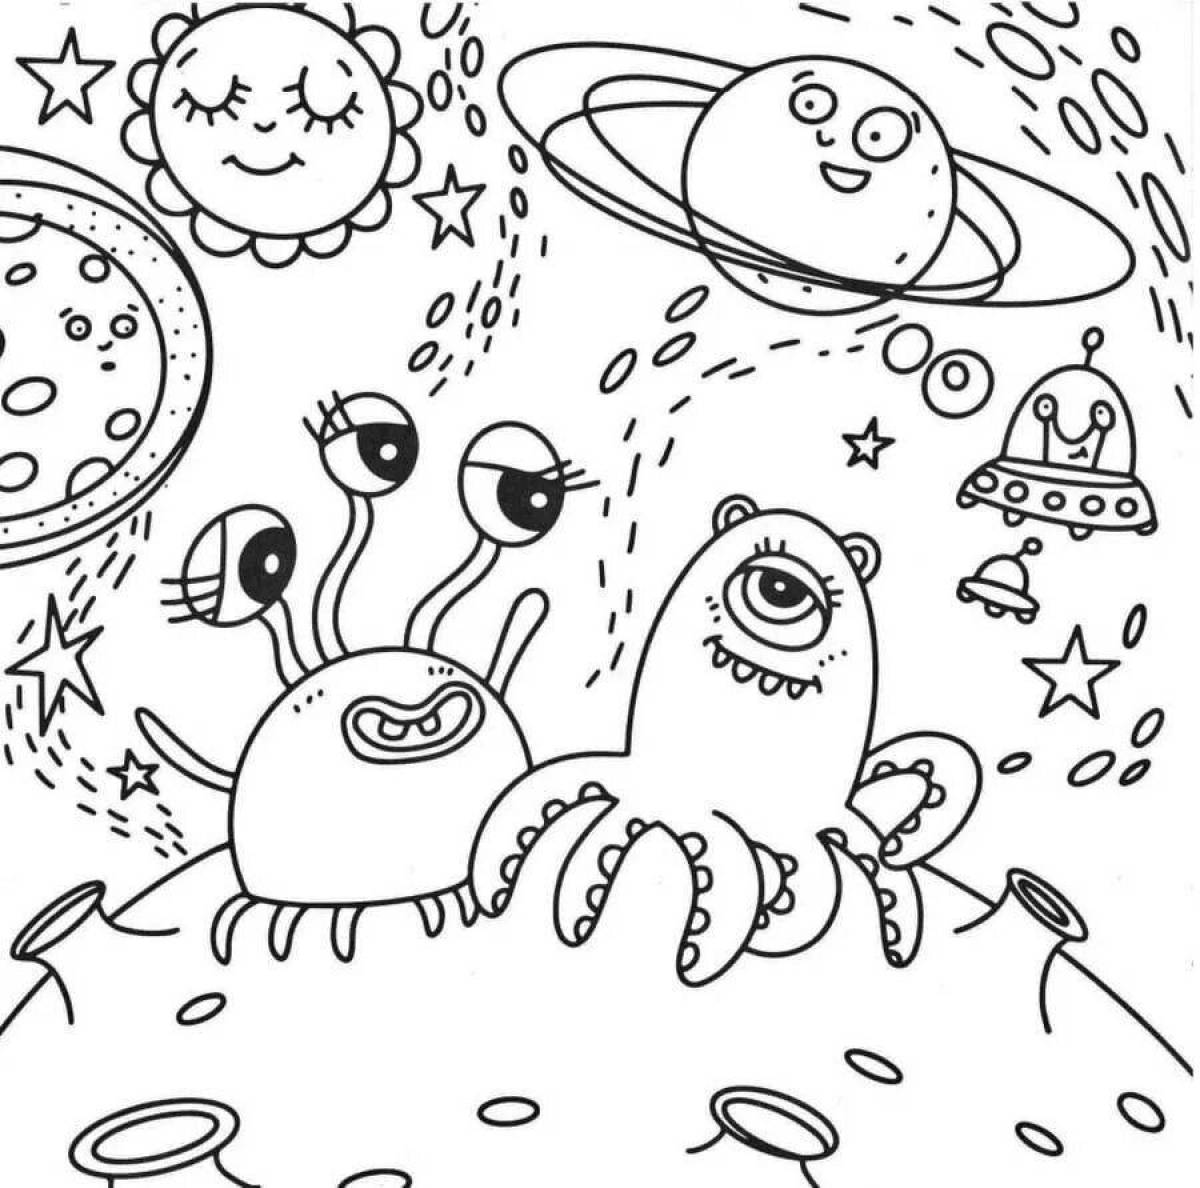 Awesome space and planet coloring pages for kids